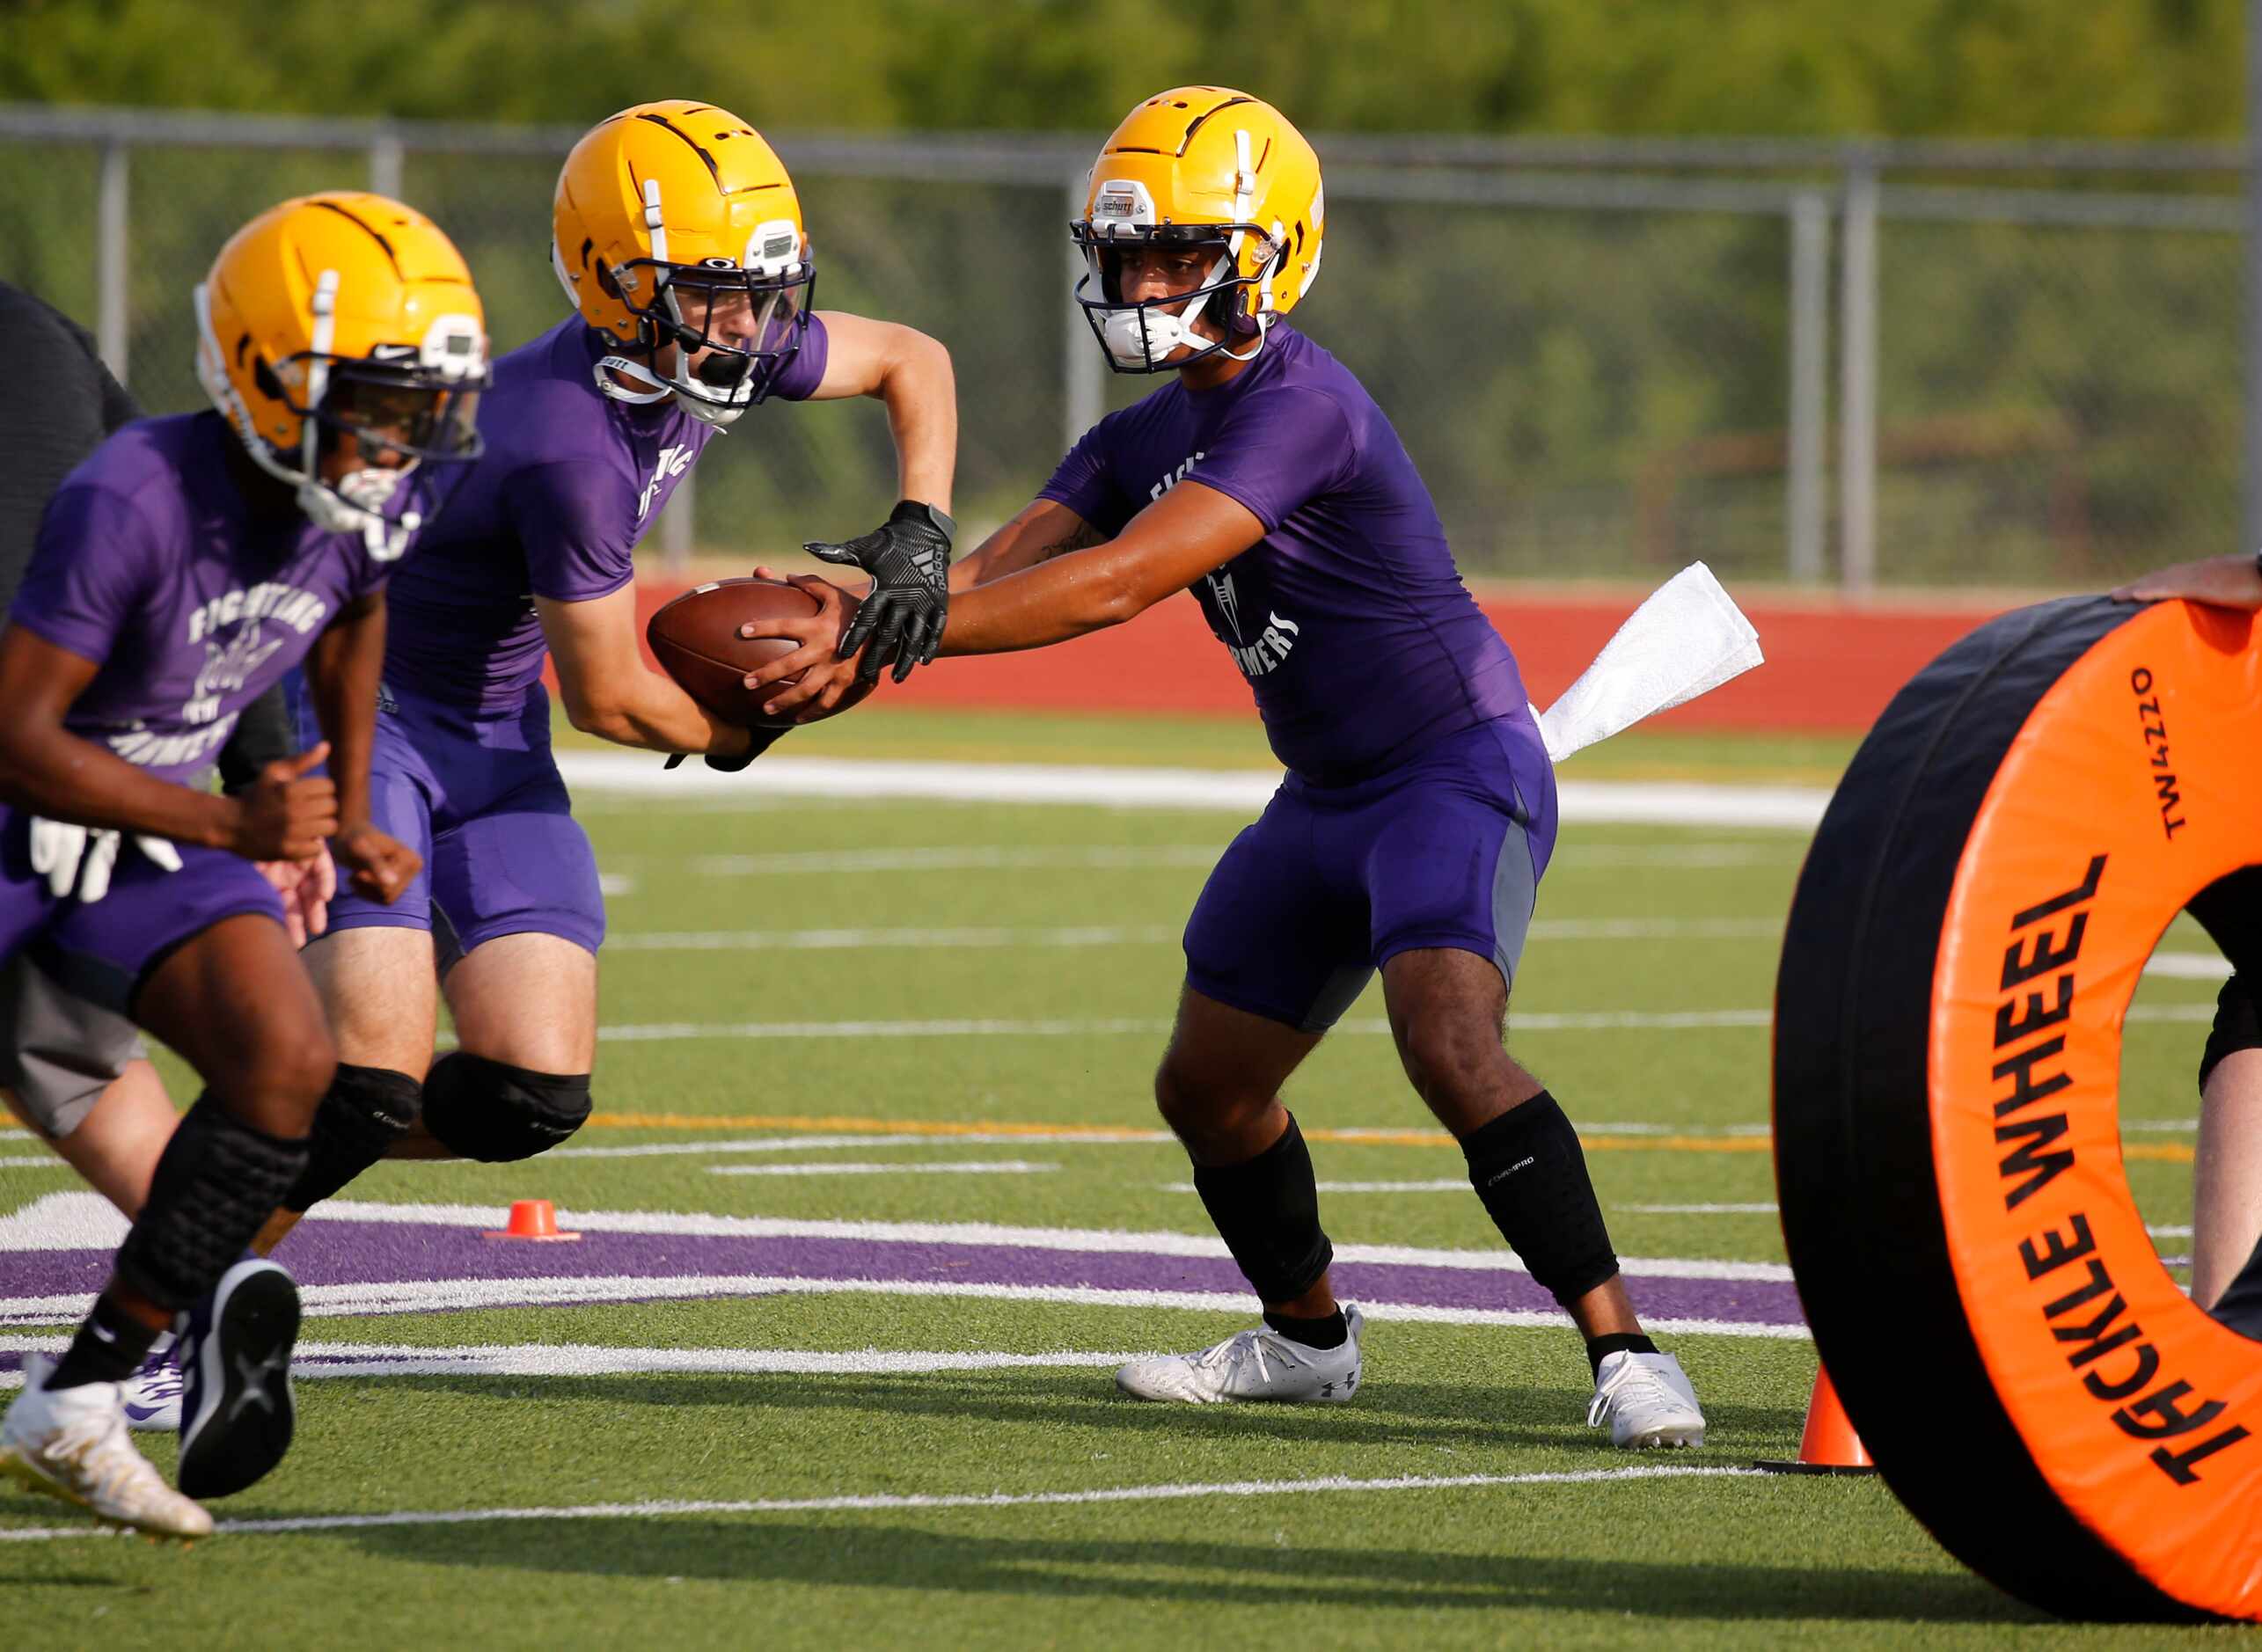 Farmersville's quarterback EJ Chairez fakes a handoff to Braden Lair during the first day of...